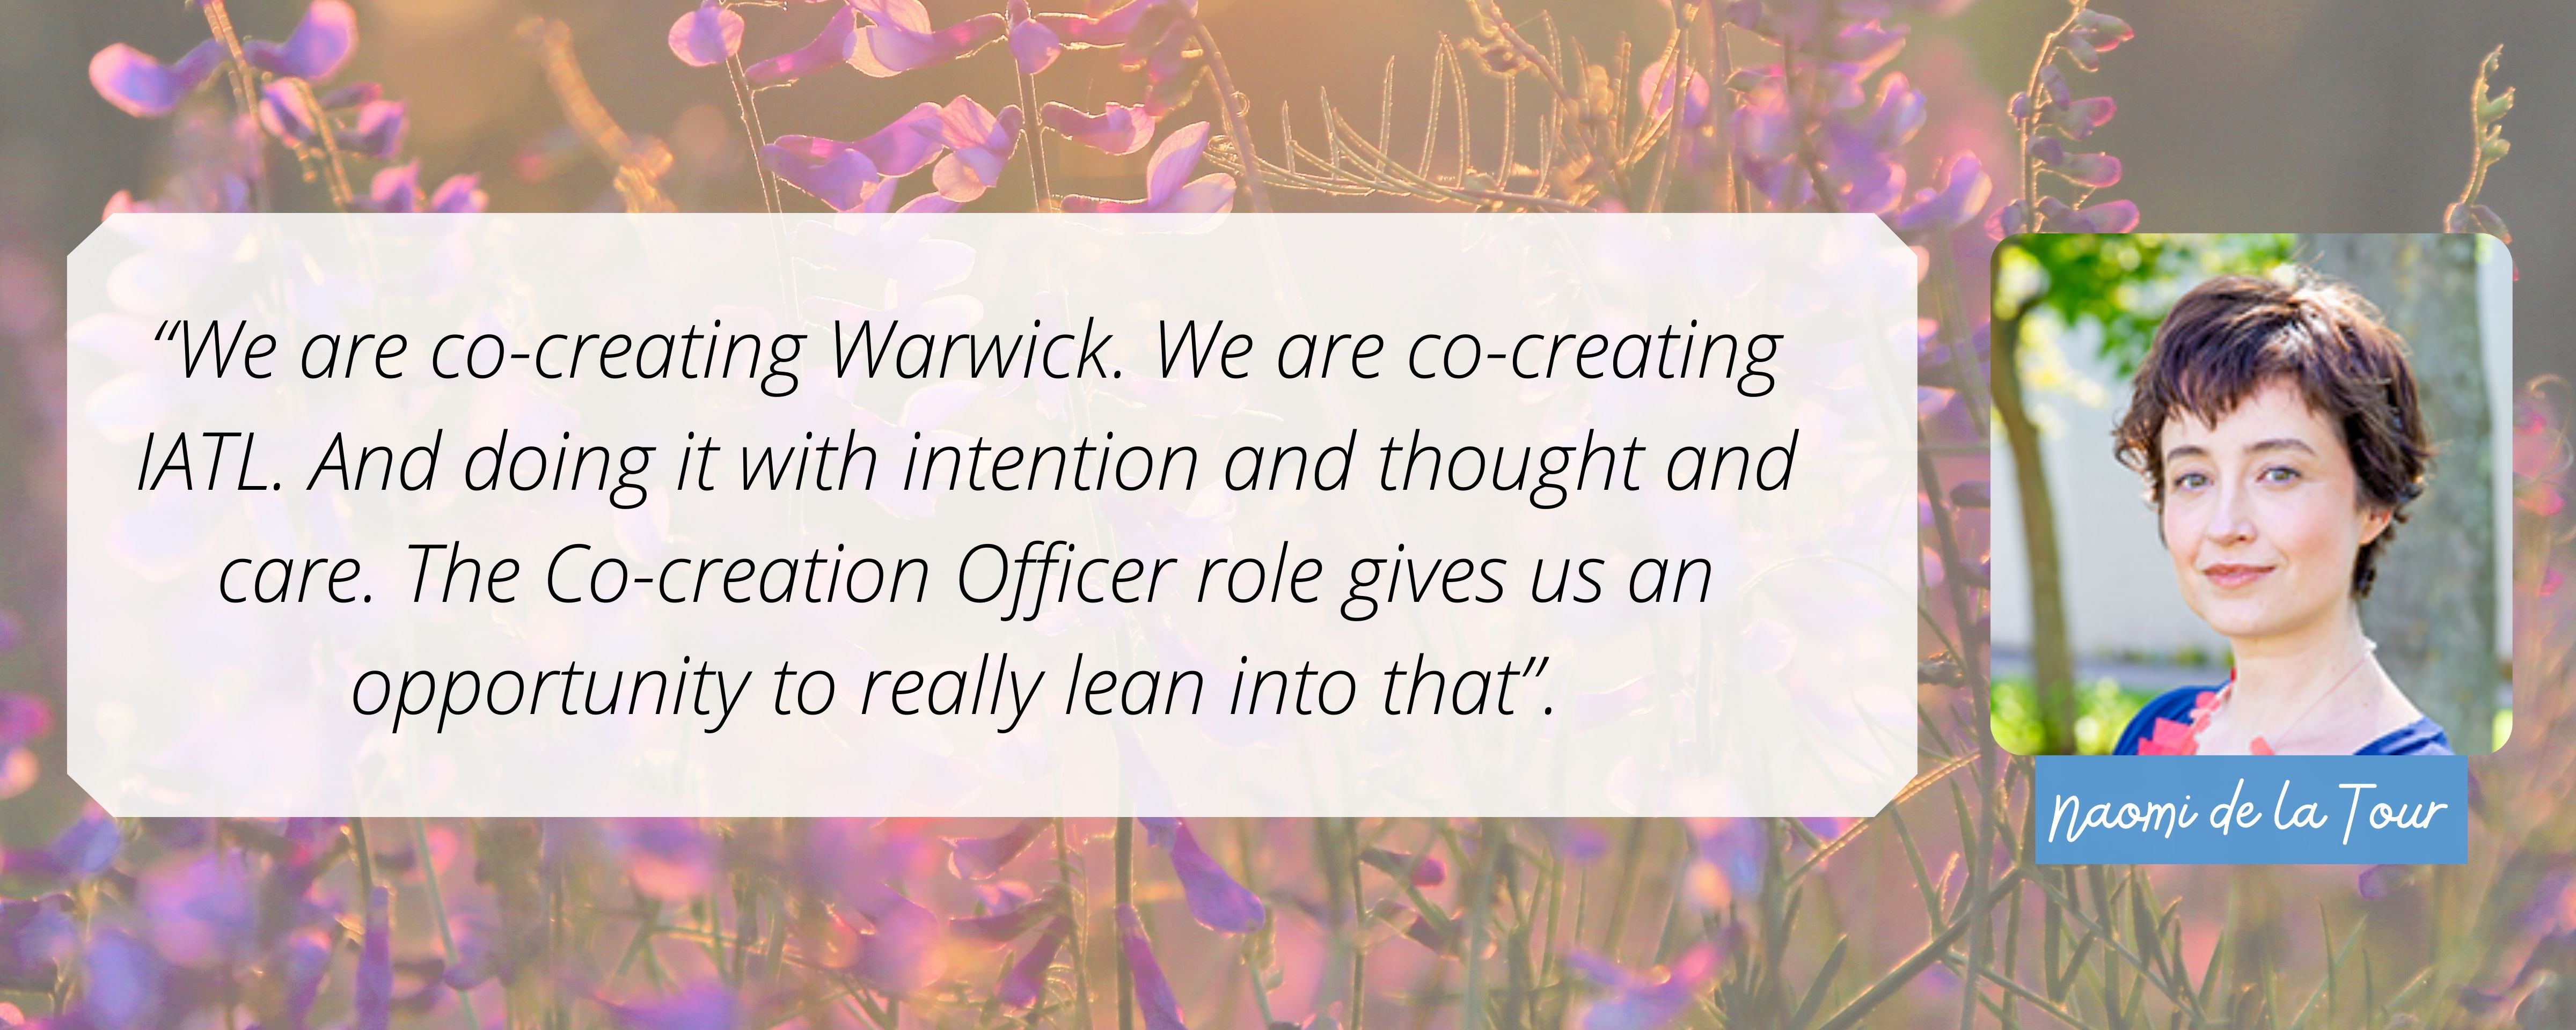 We are co-creating Warwick. We are co-creating IATL. And doing it with intention and thought and care. The Co-creation Officer role gives us an opportunity to really lean into that.